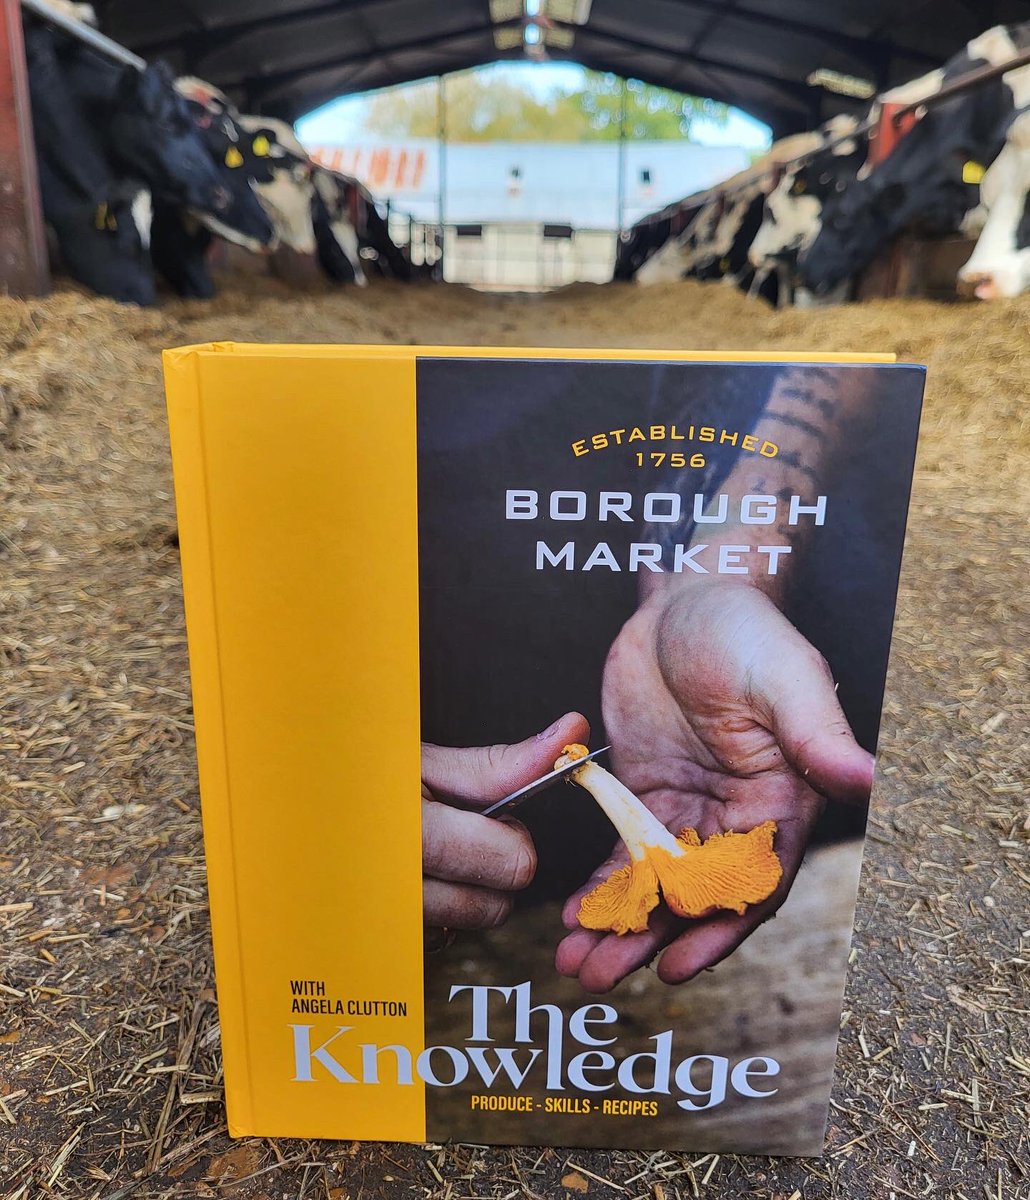 It’s a pleasure to be featured in ‘Borough Market: The Knowledge’ by @angela_clutton, which is out now! The book contains recipes and specialist knowledge from the excellent traders at @boroughmarket, including a piece by Steve on the wonders of raw milk 📖